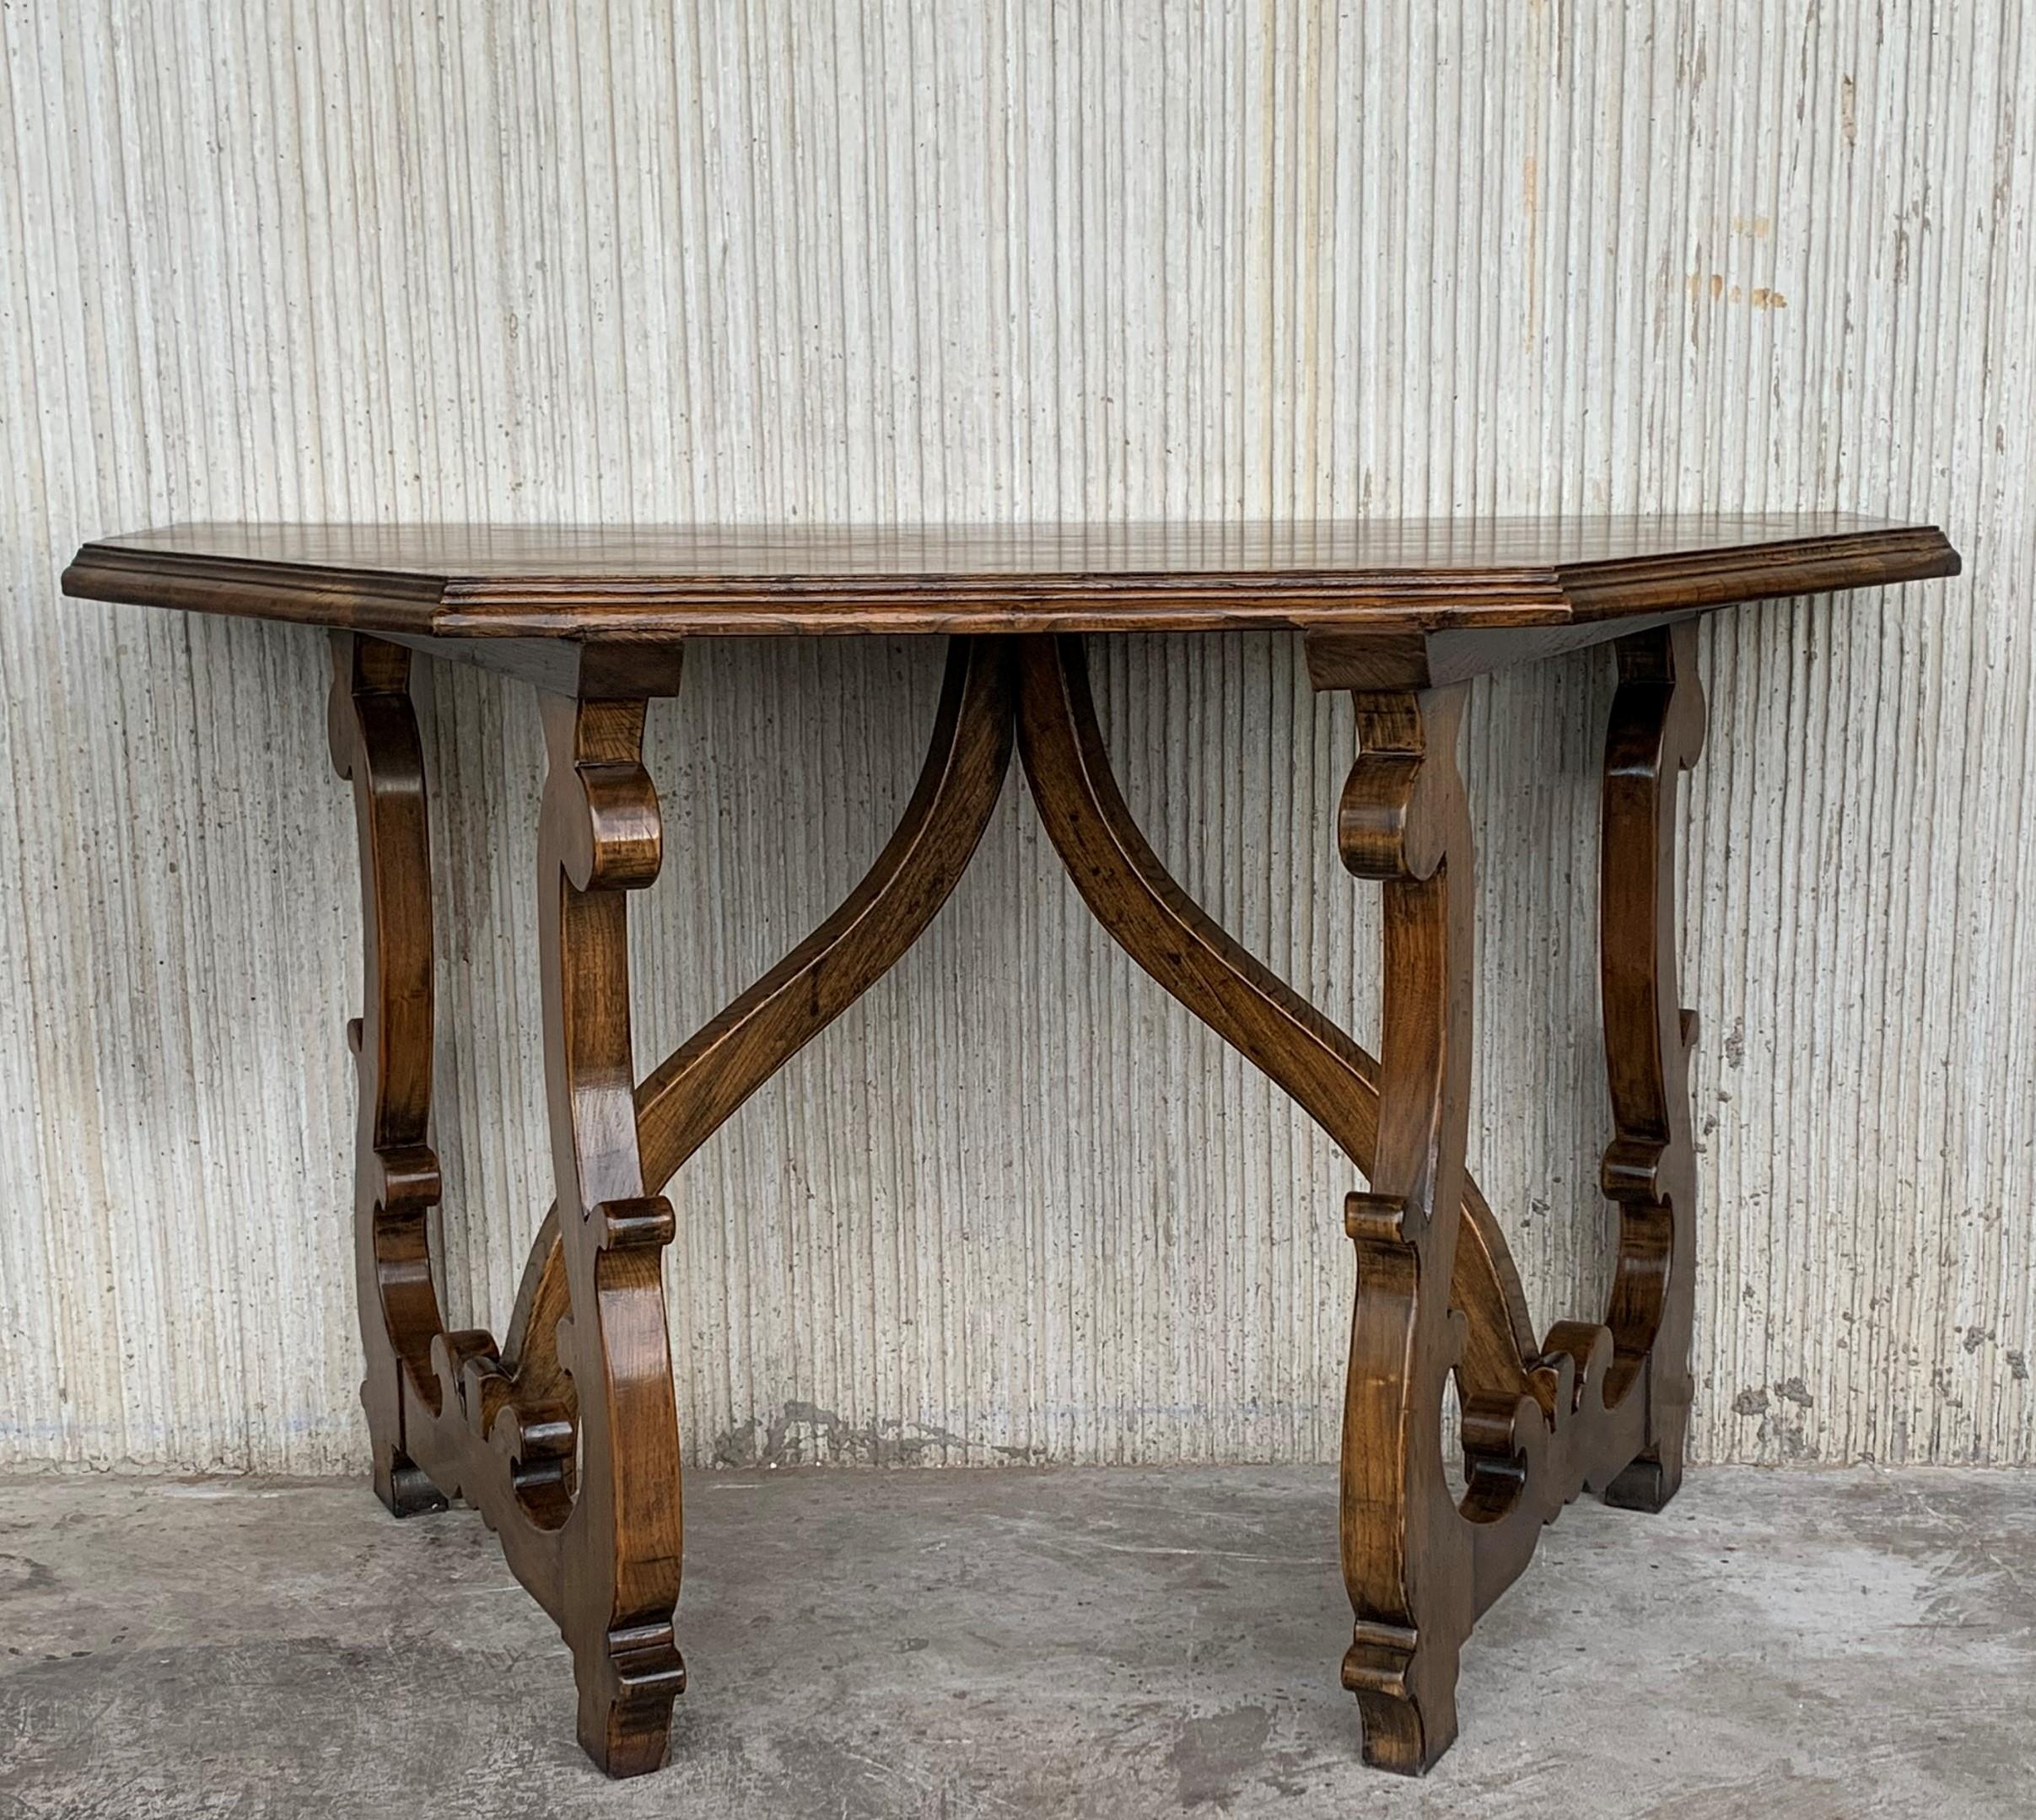 Early 20th convertible Spanish walnut console tables in center table or dining table.
Both consoles made of solid walnut with beautiful original patina.
In two self-supporting parts, flanked by trapezoid section on either side, each with plank top